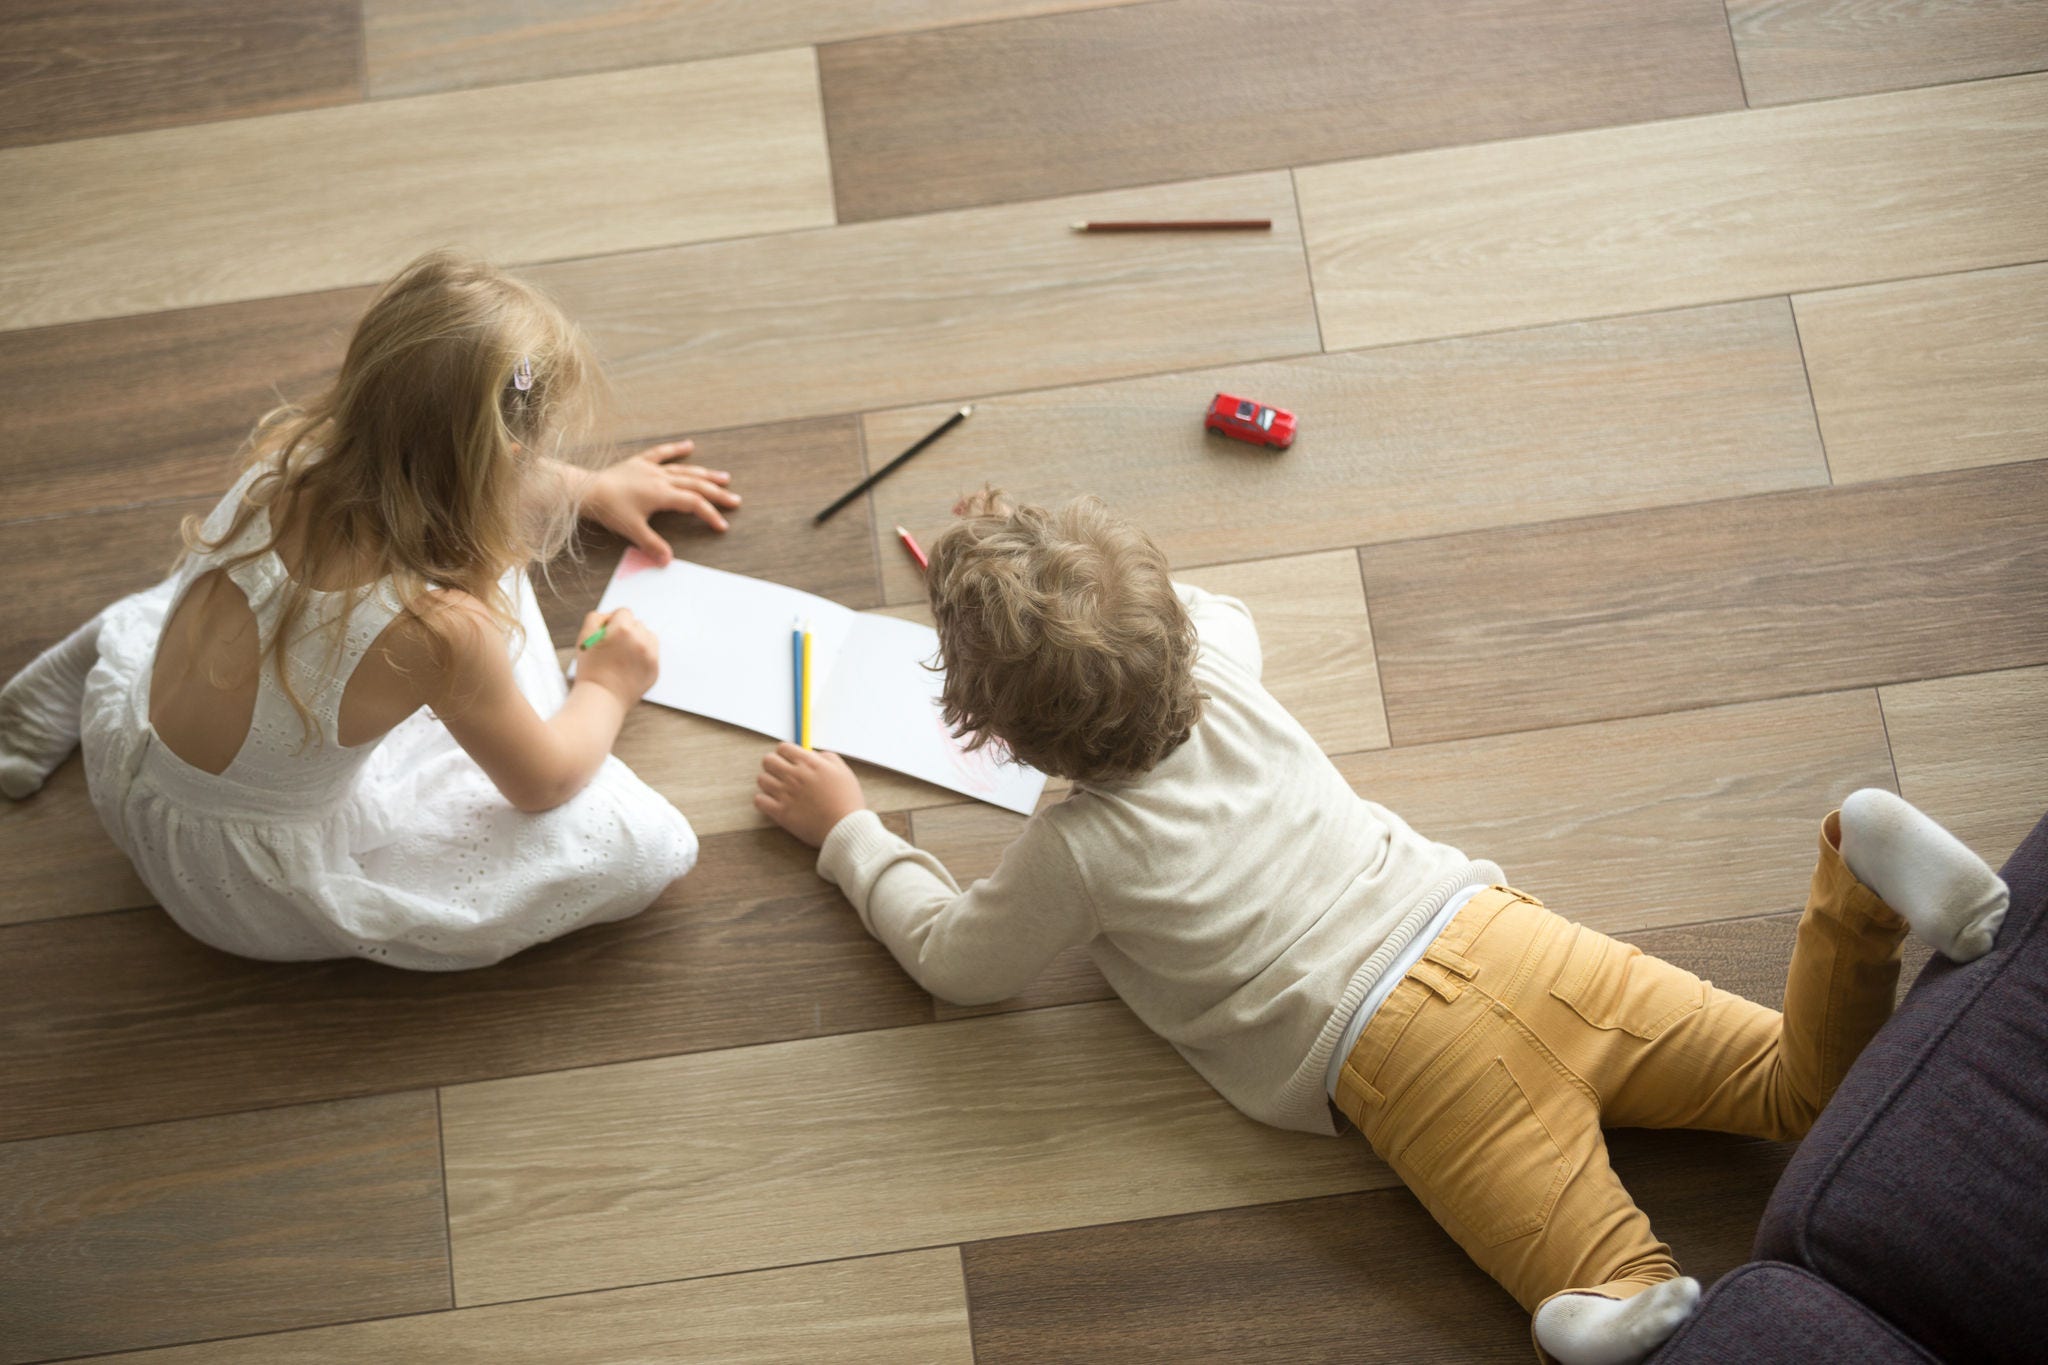 Kids playing drawing together on floor at home, top view 